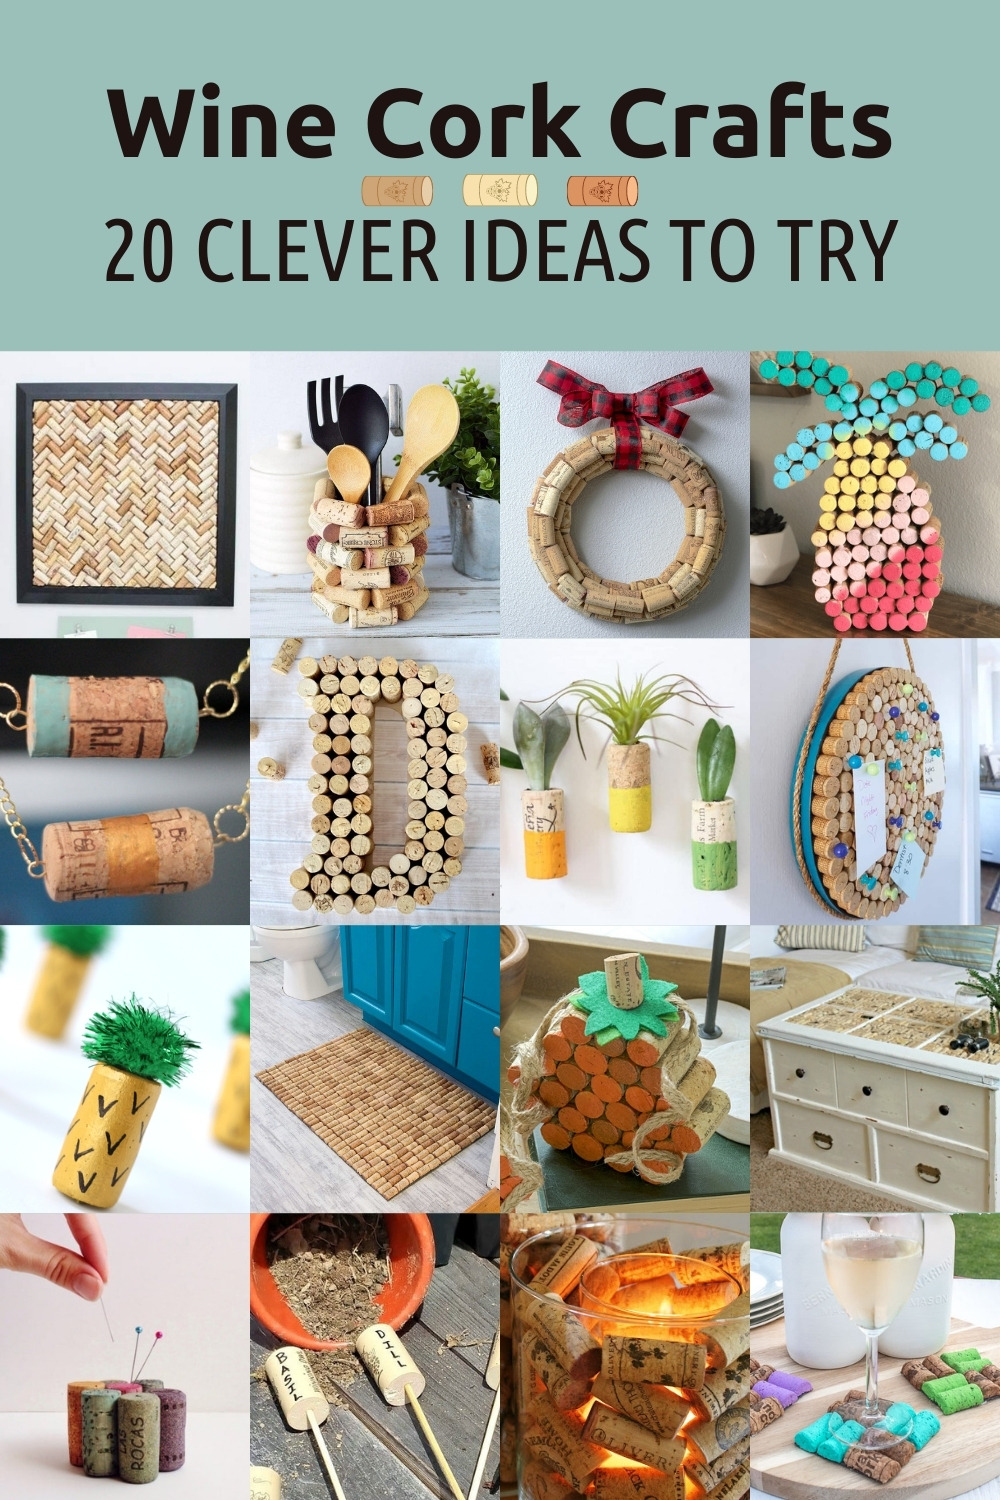 Wine Cork Crafts - 20 Clever Ideas to Try Now